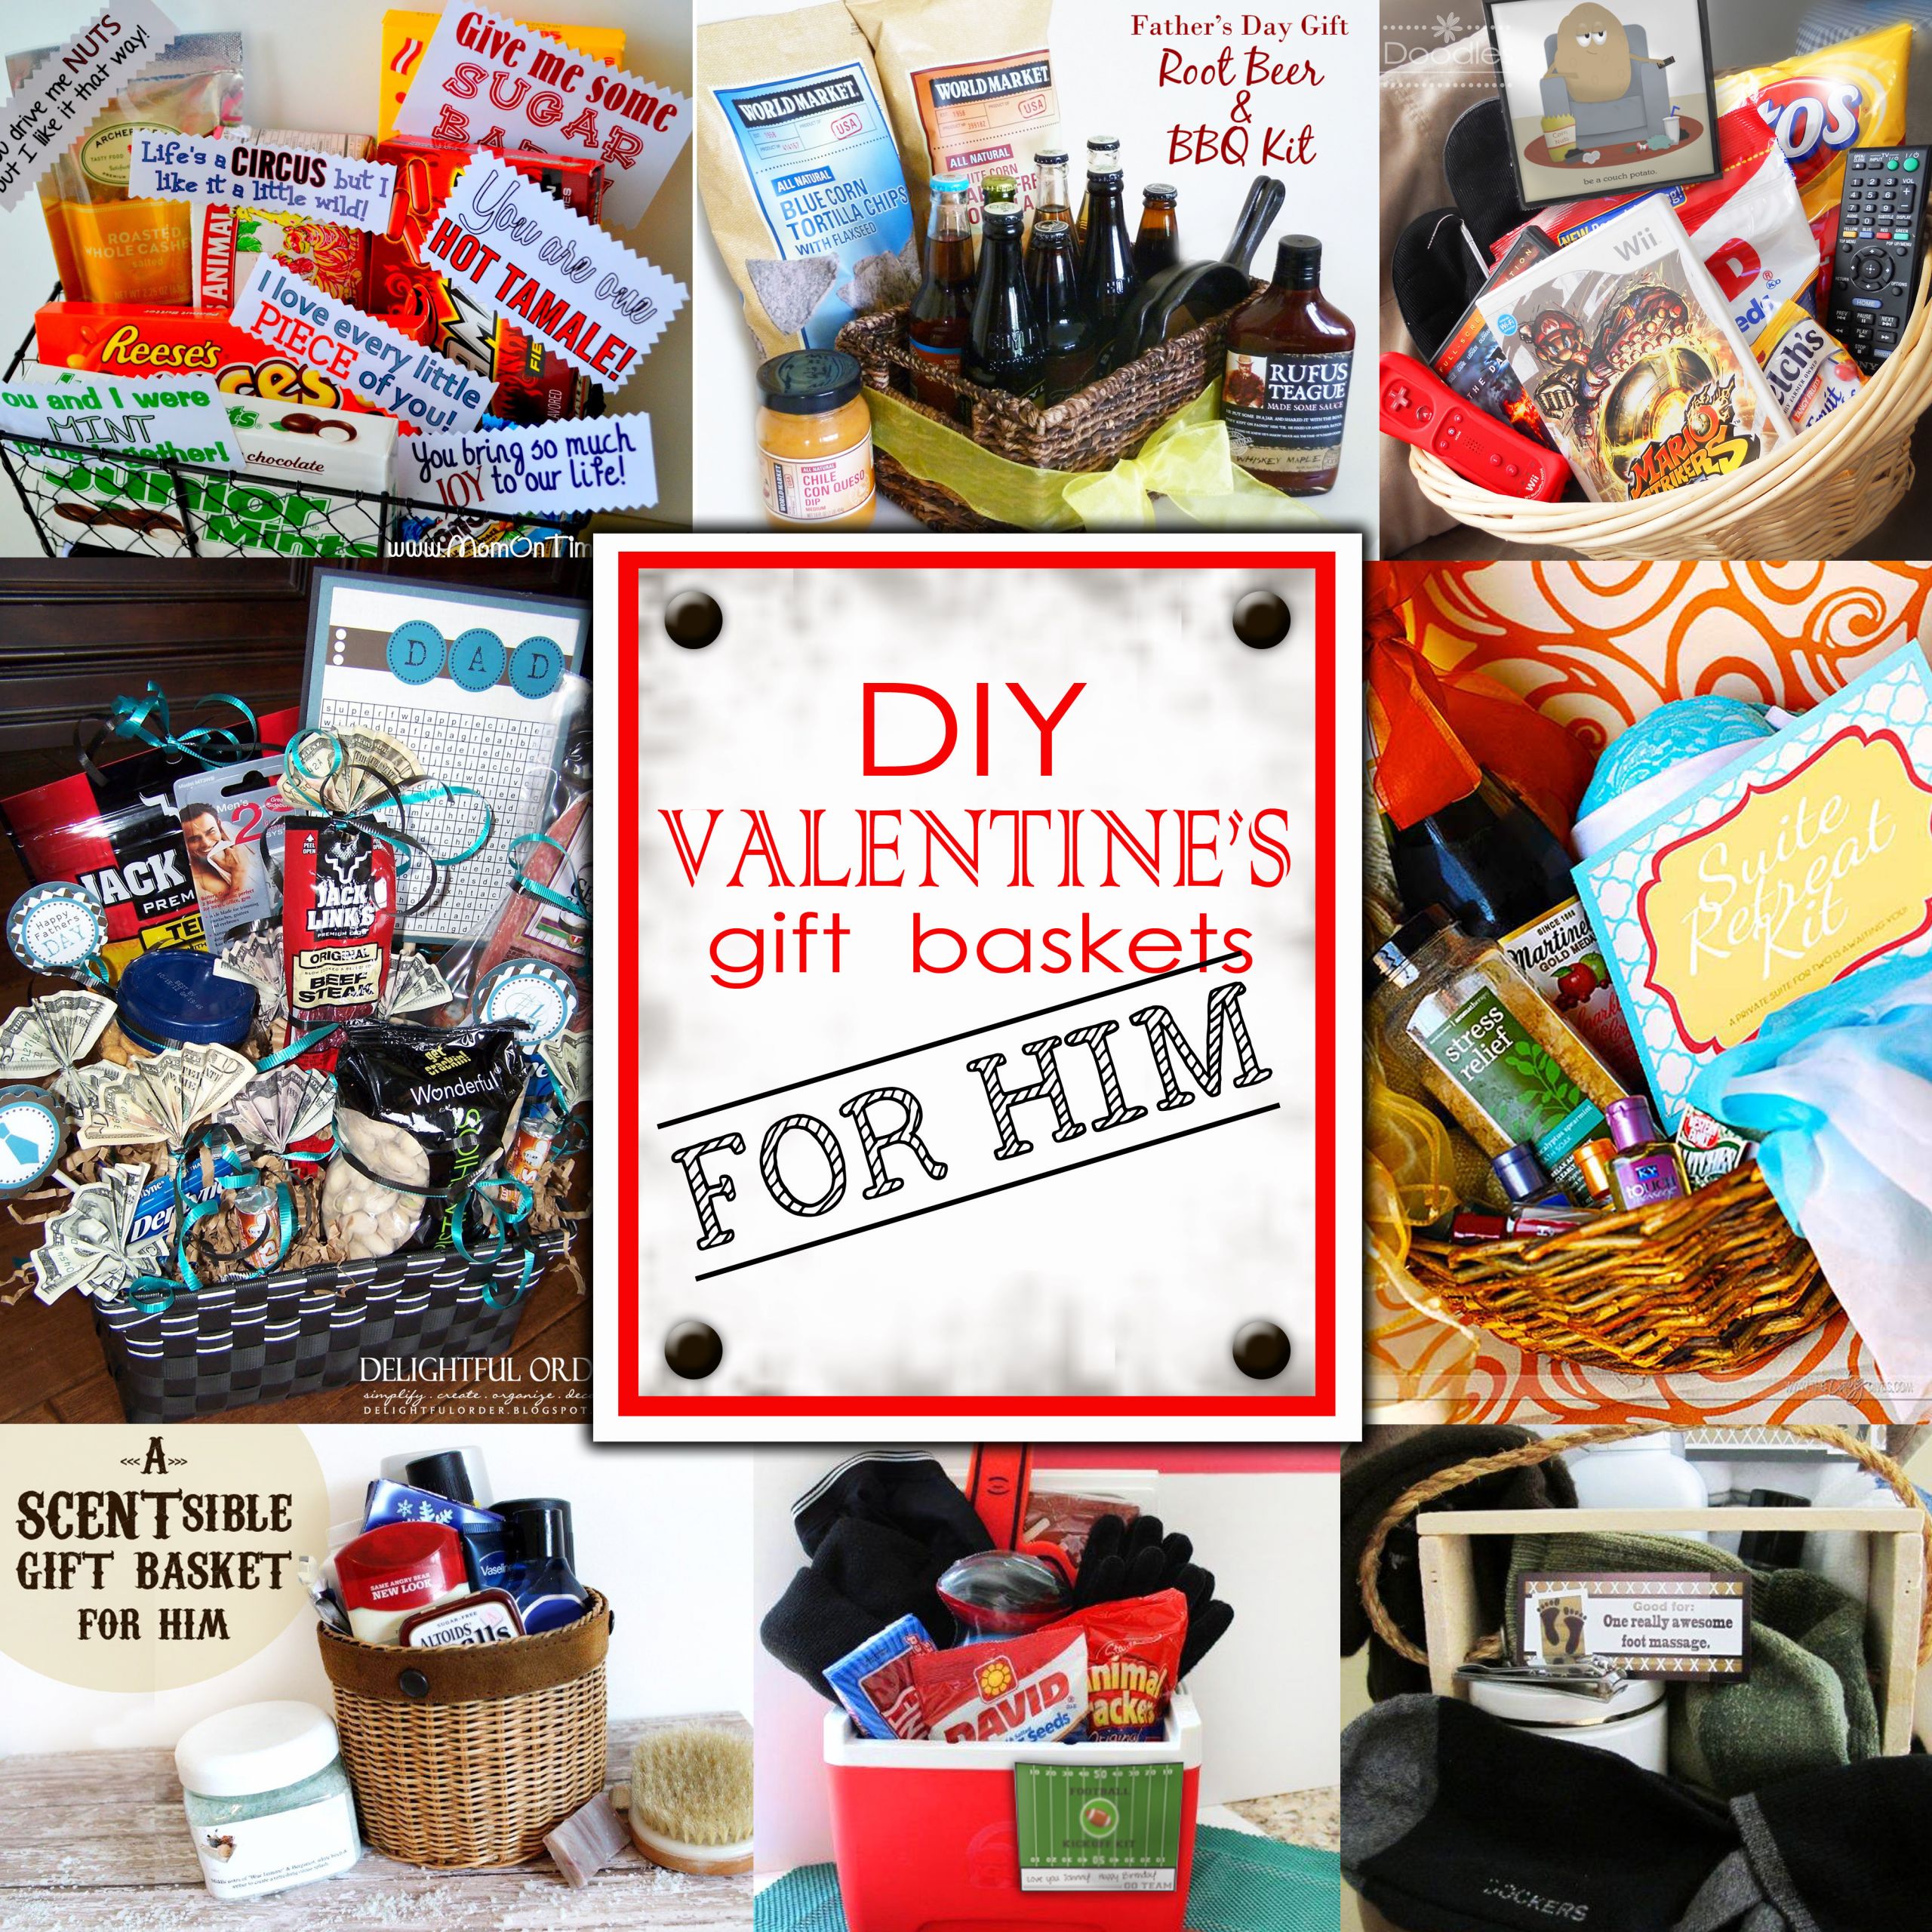 Valentine Day Gift Ideas for Him Diy Beautiful Diy Valentine S Day Gift Baskets for Him Darling Doodles